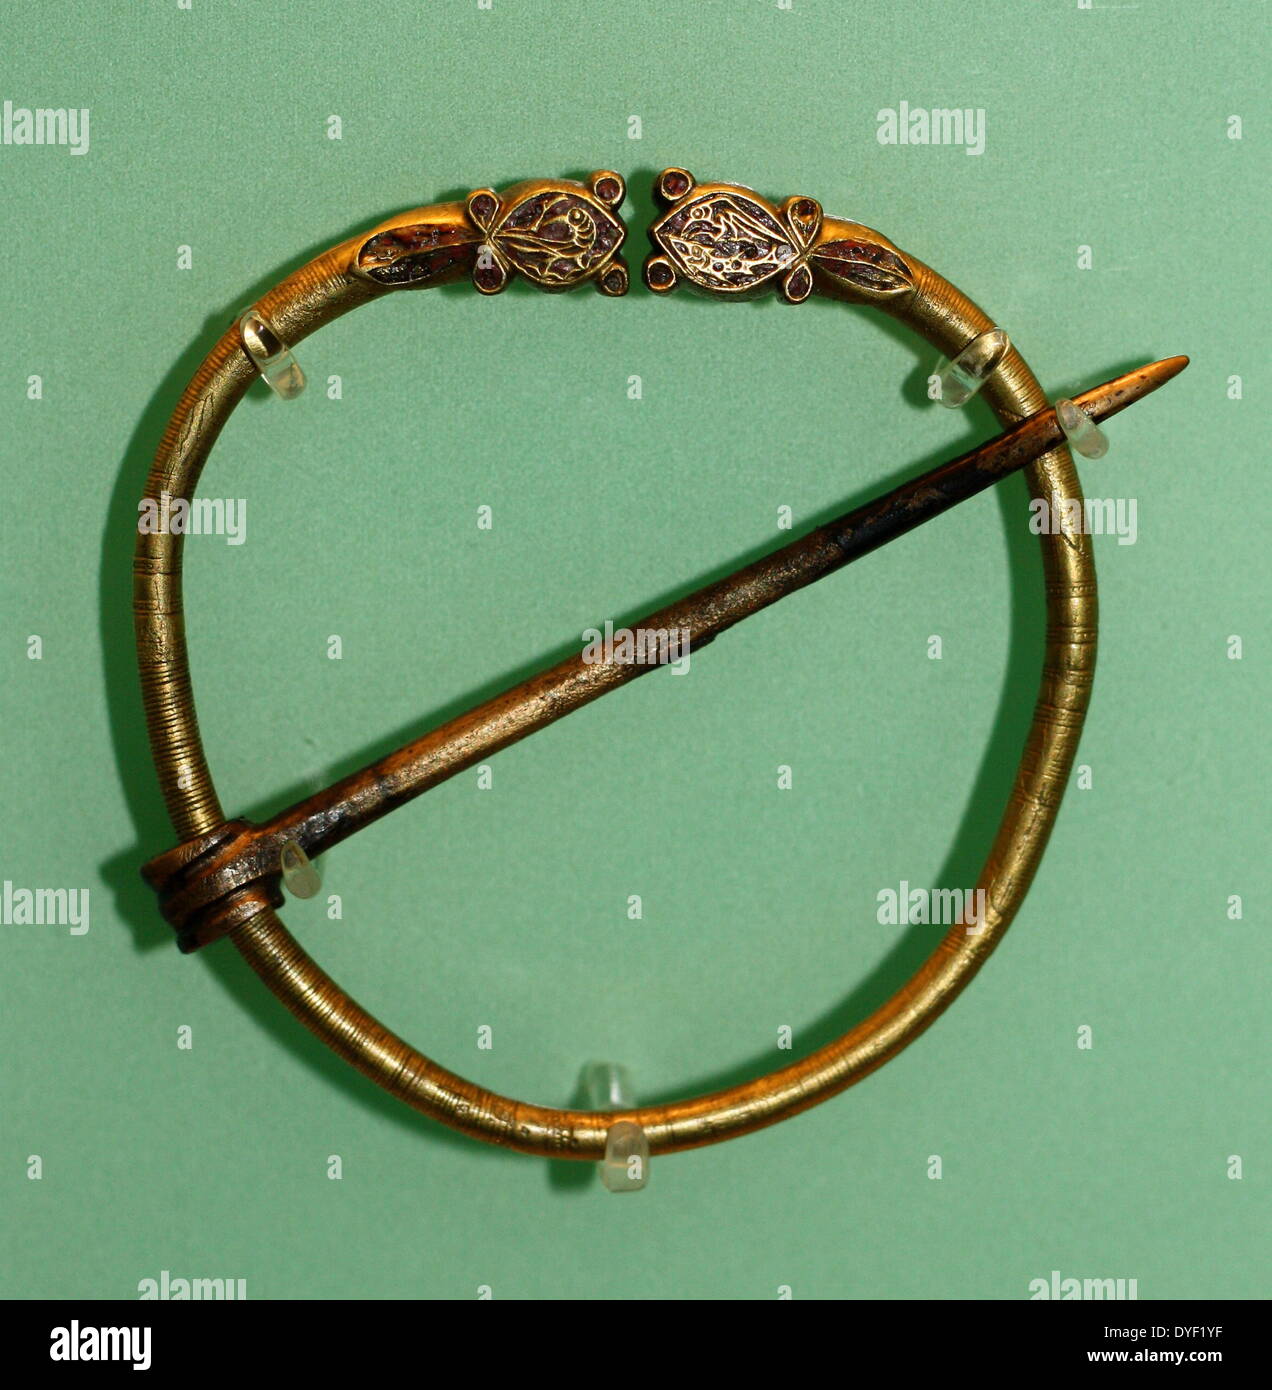 Roman Brooch High Resolution Stock Photography and Images - Alamy